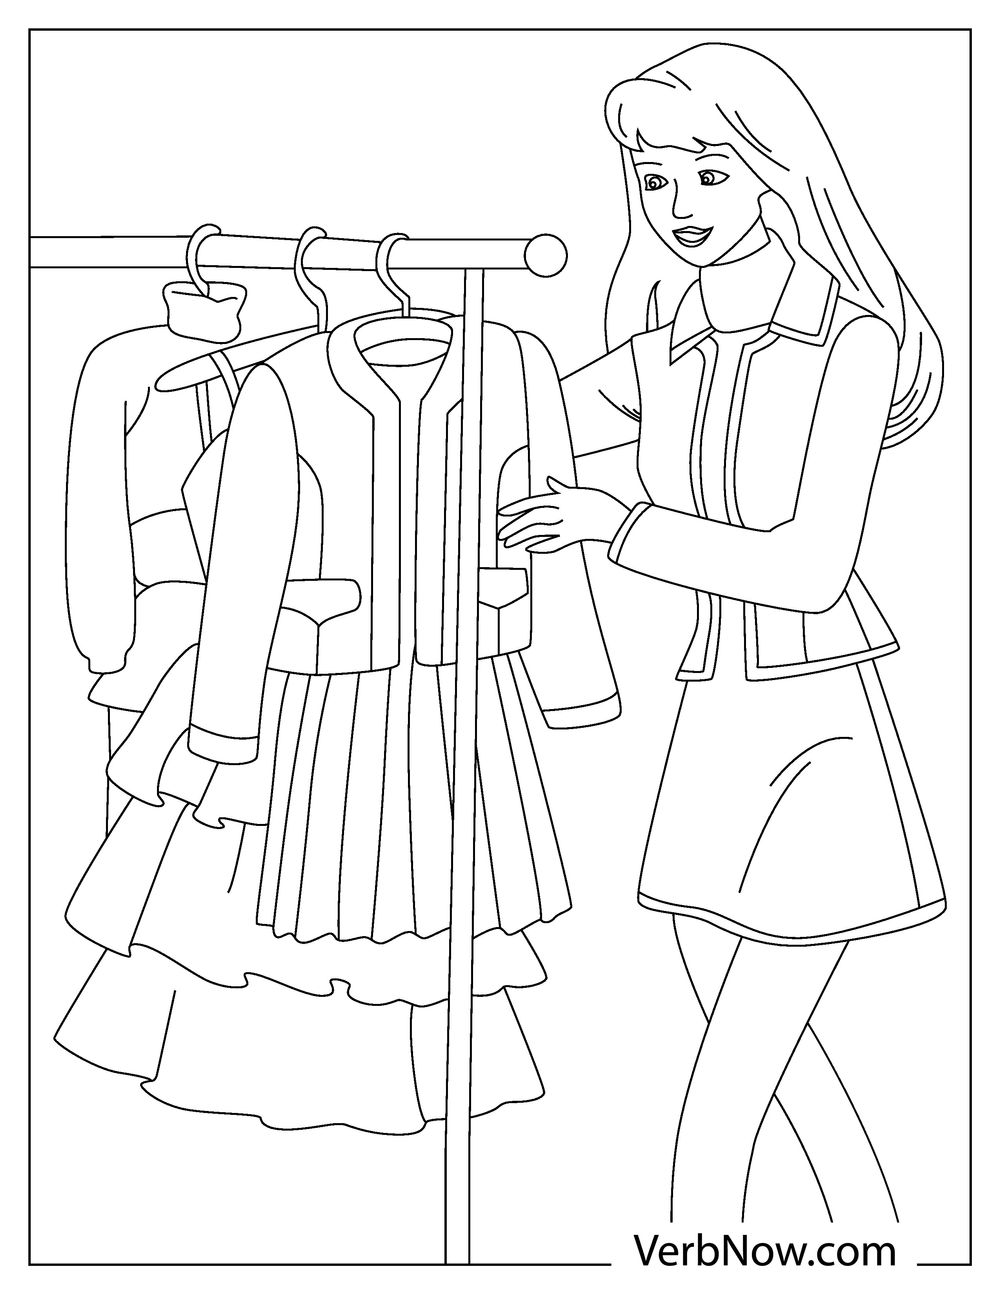 Free DRESSES Coloring Pages & Book for Download (Printable PDF) - VerbNow